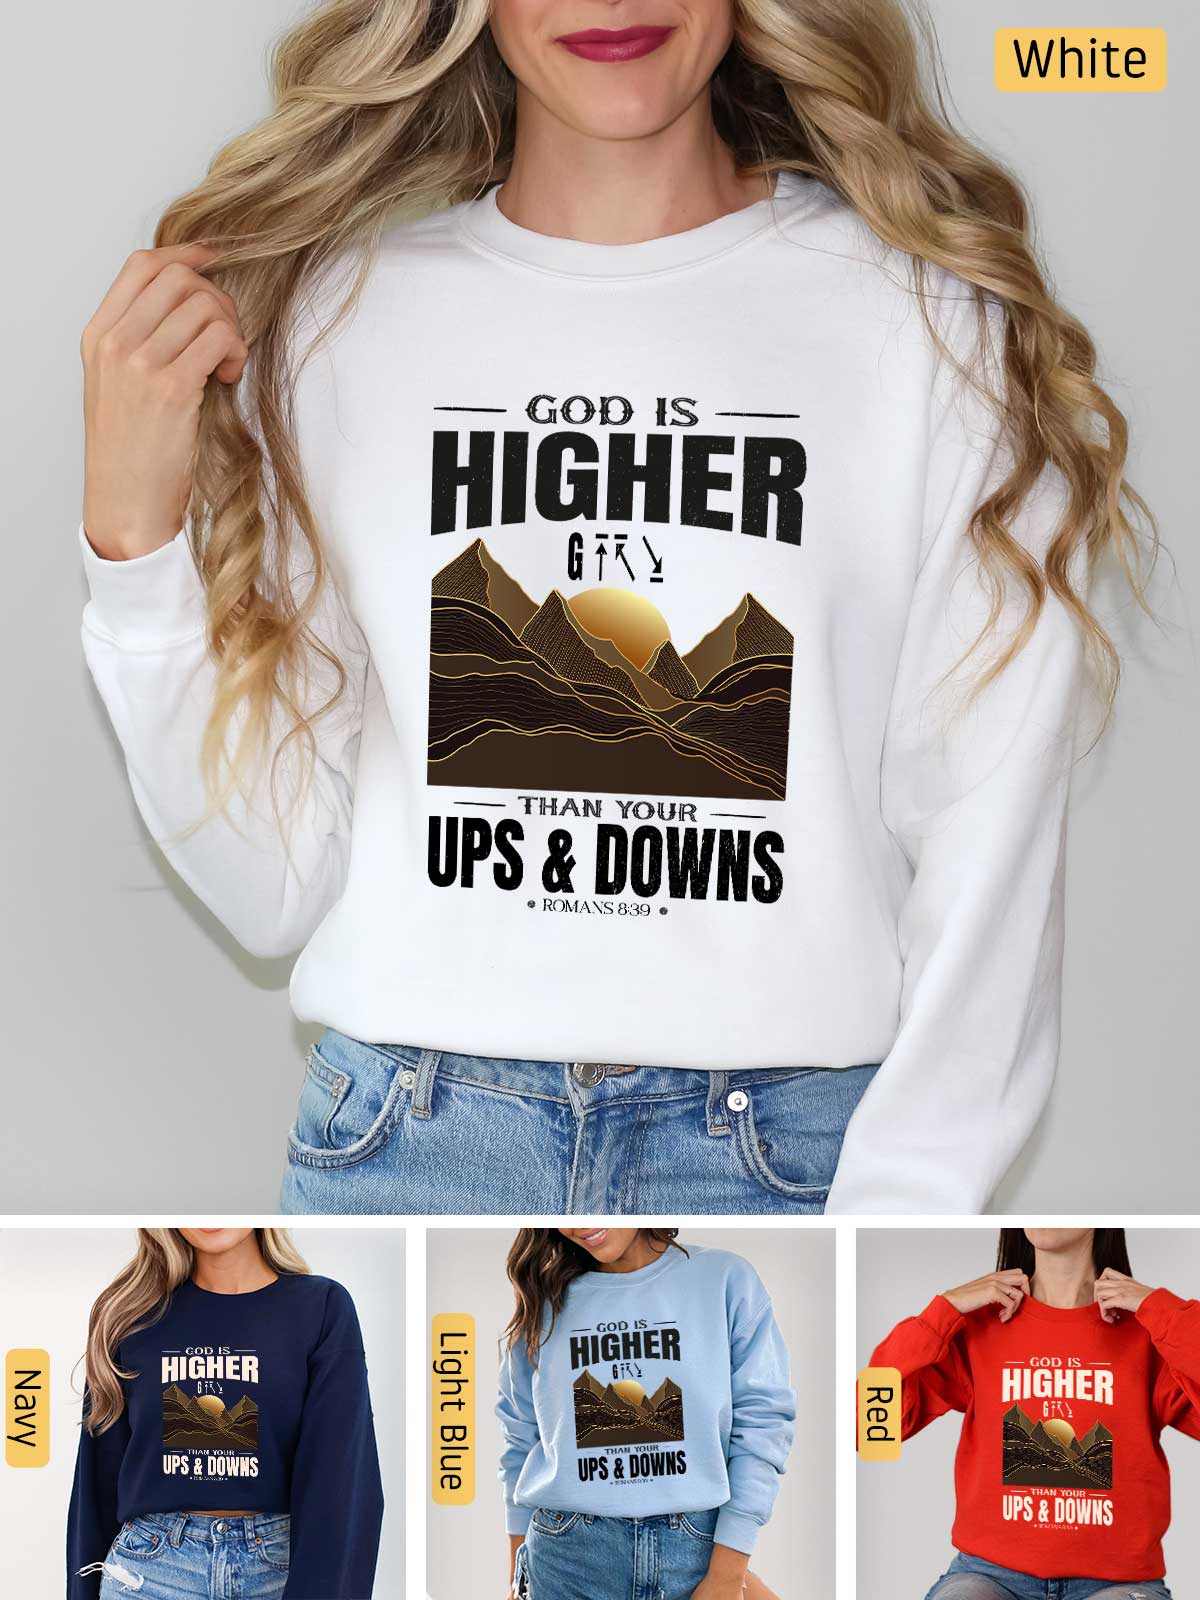 a woman wearing a sweatshirt that says higher is higher than ups and downs